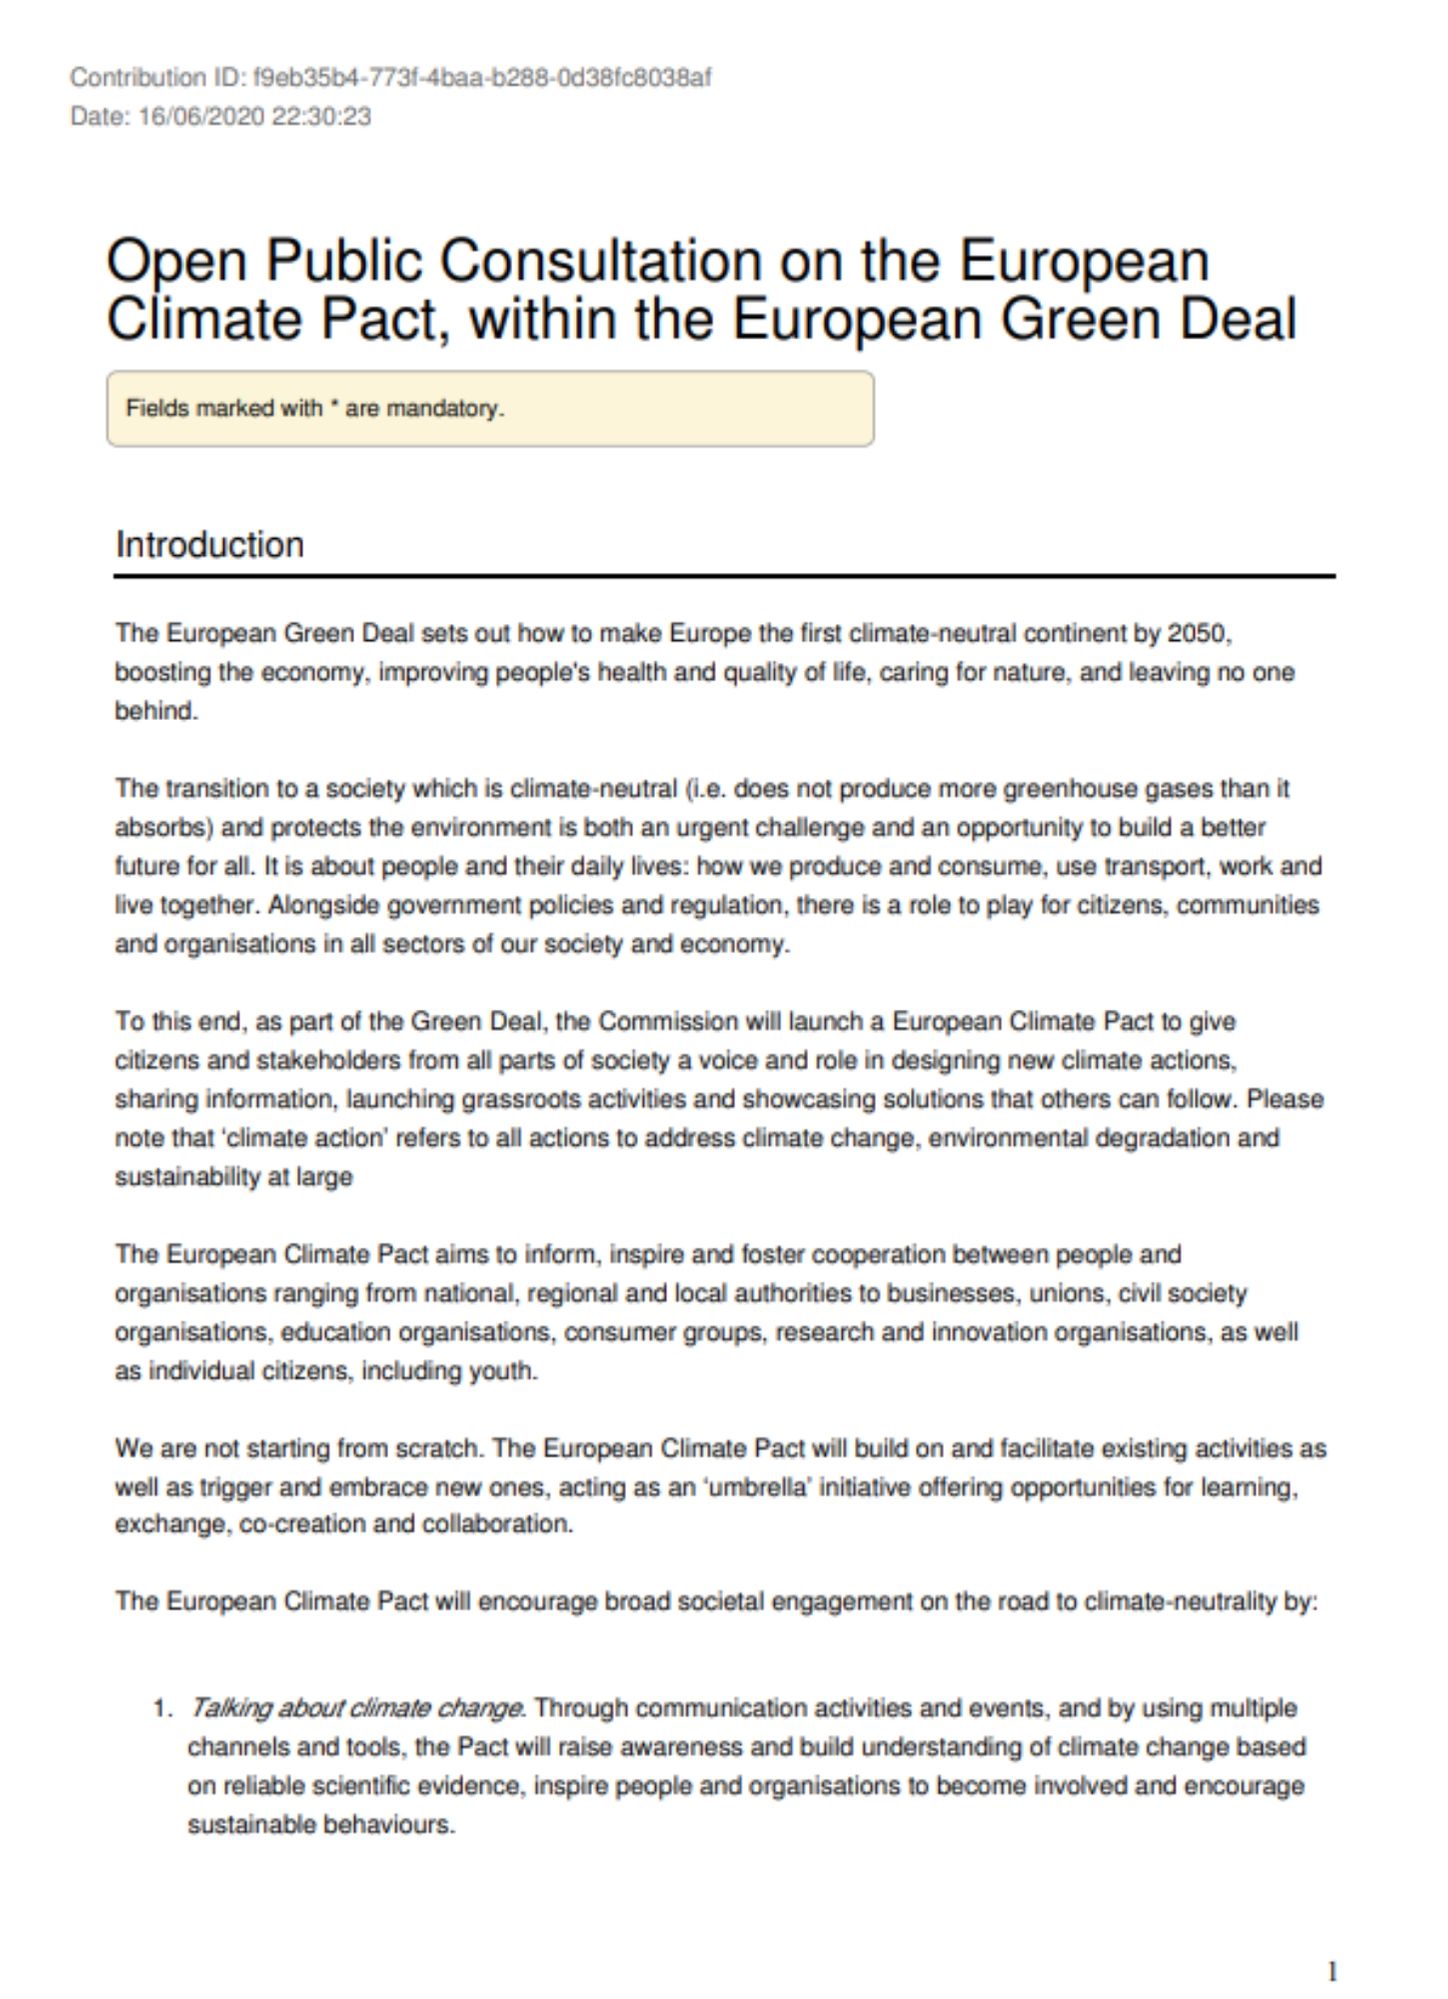 Consultation - European Climate Pact